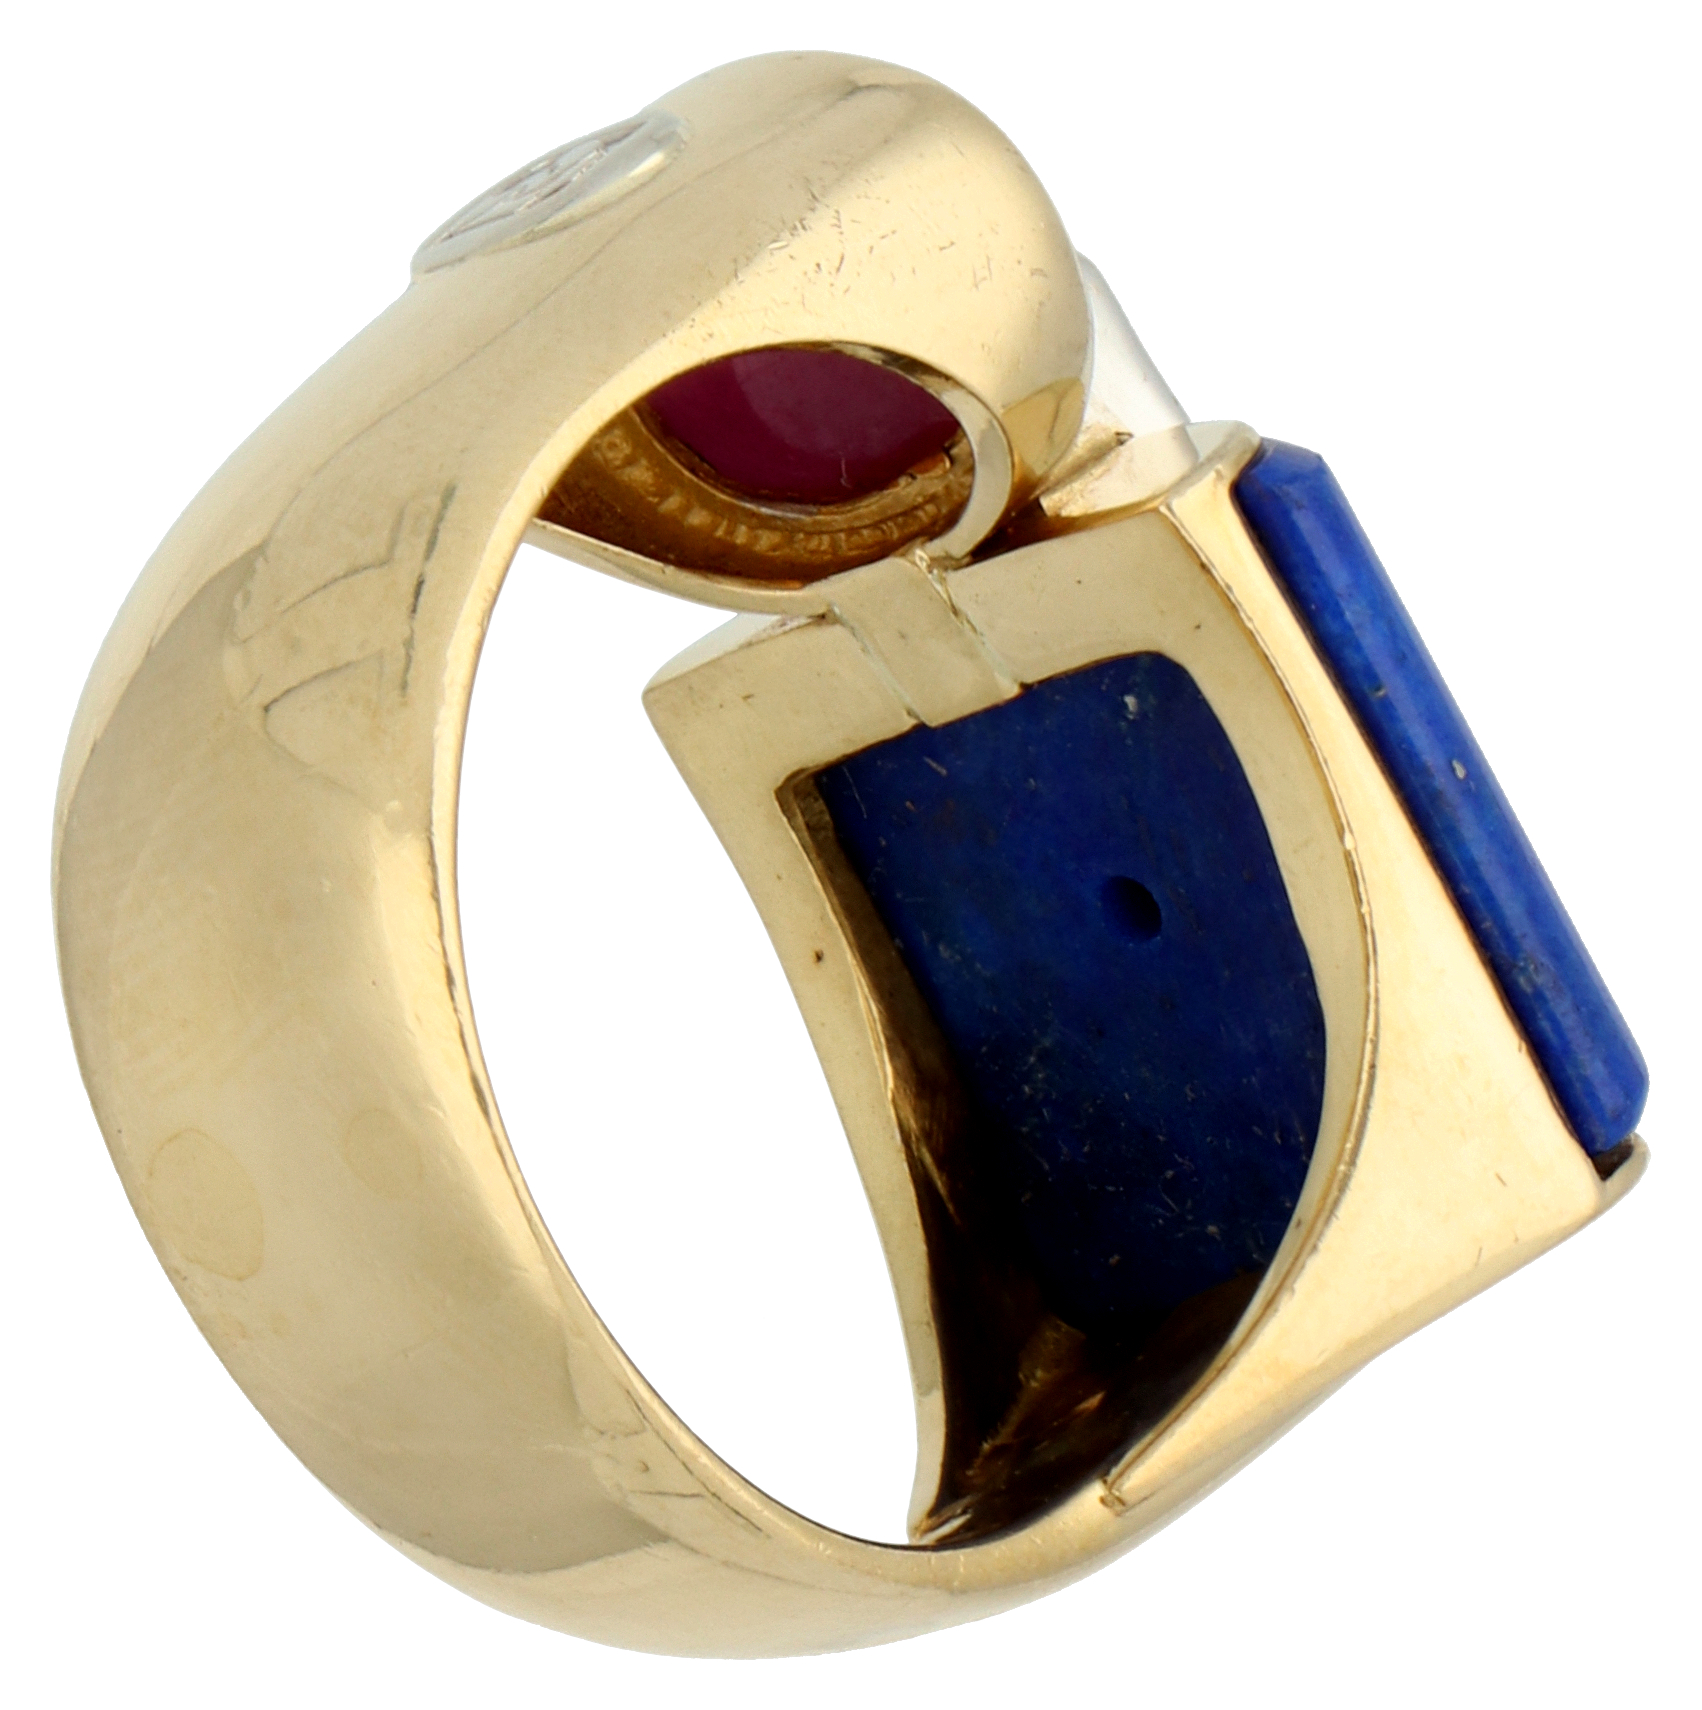 No Reserve - 18K Yellow Gold Centoventuno design ring with lapis lazuli and natural ruby. - Image 2 of 4